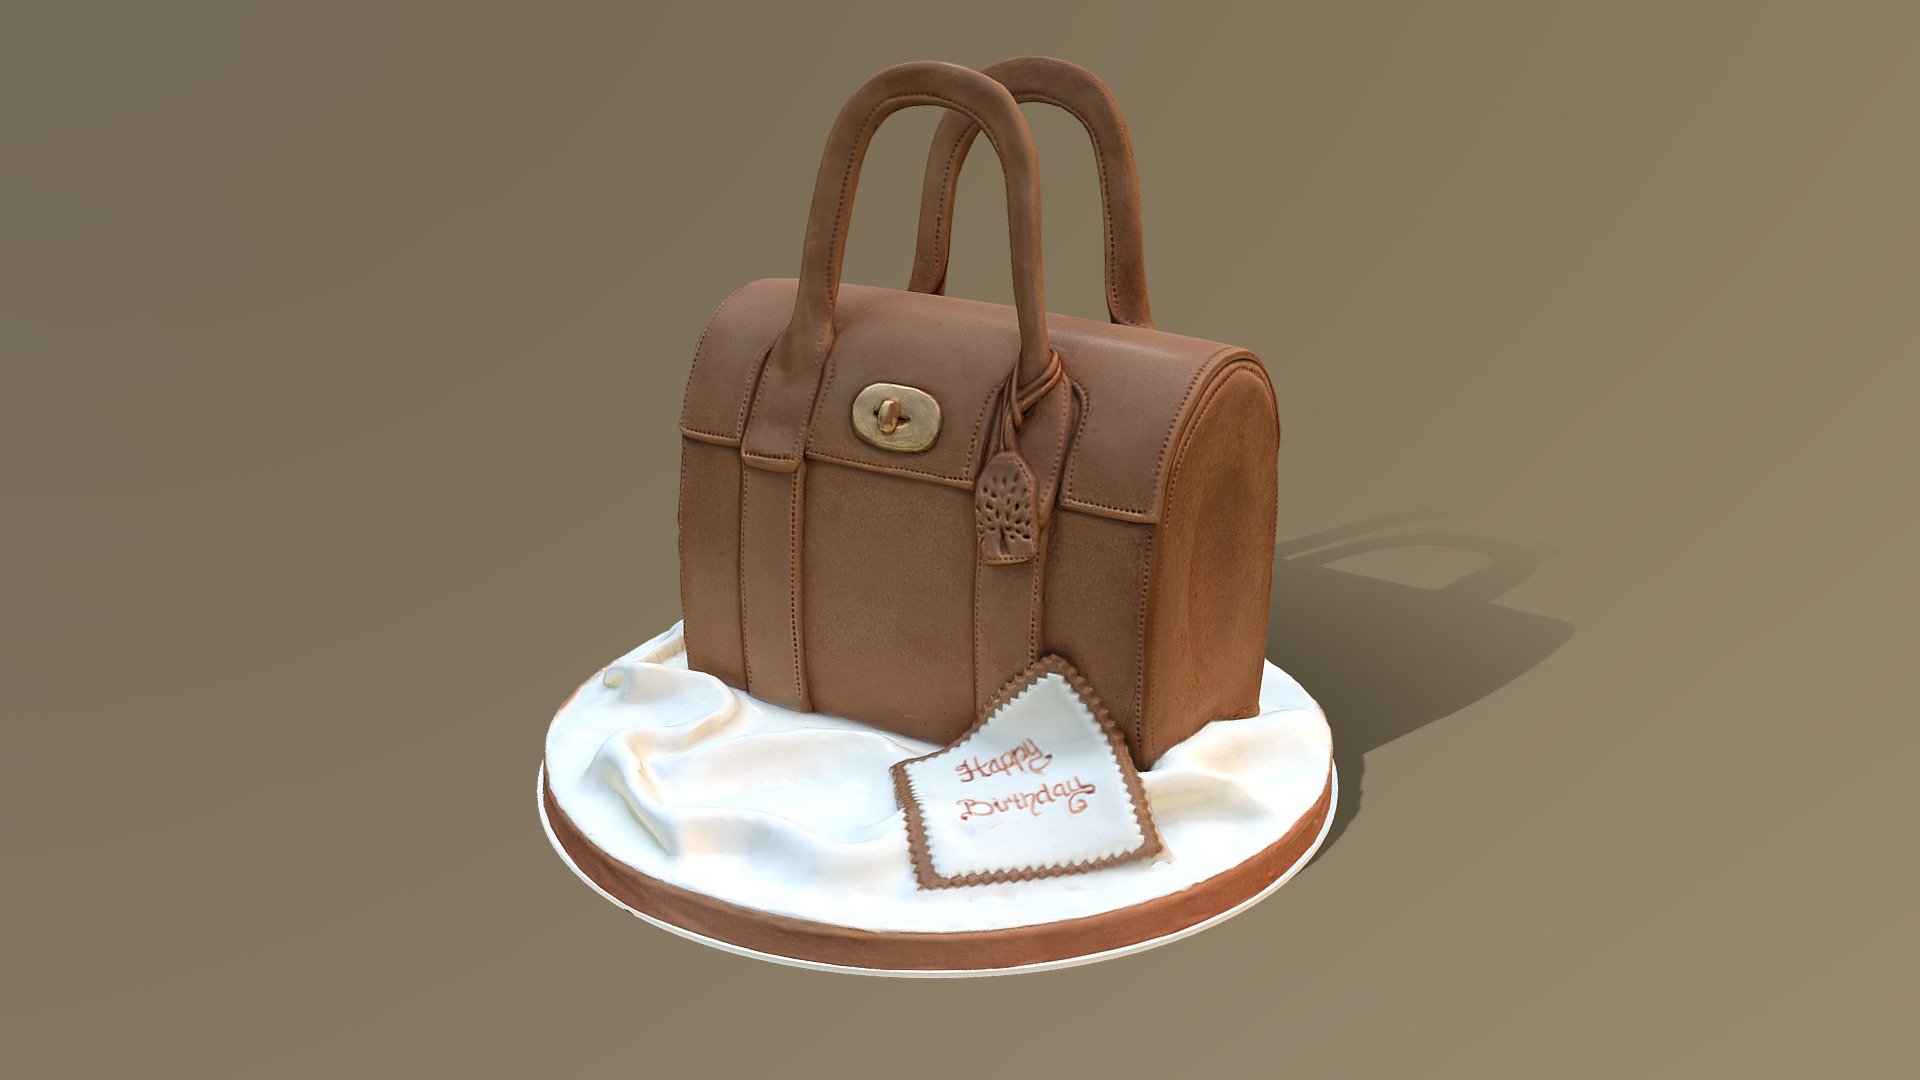 Designer Bag Cakes by The International Culinary Center — SOLIFESTYLE®